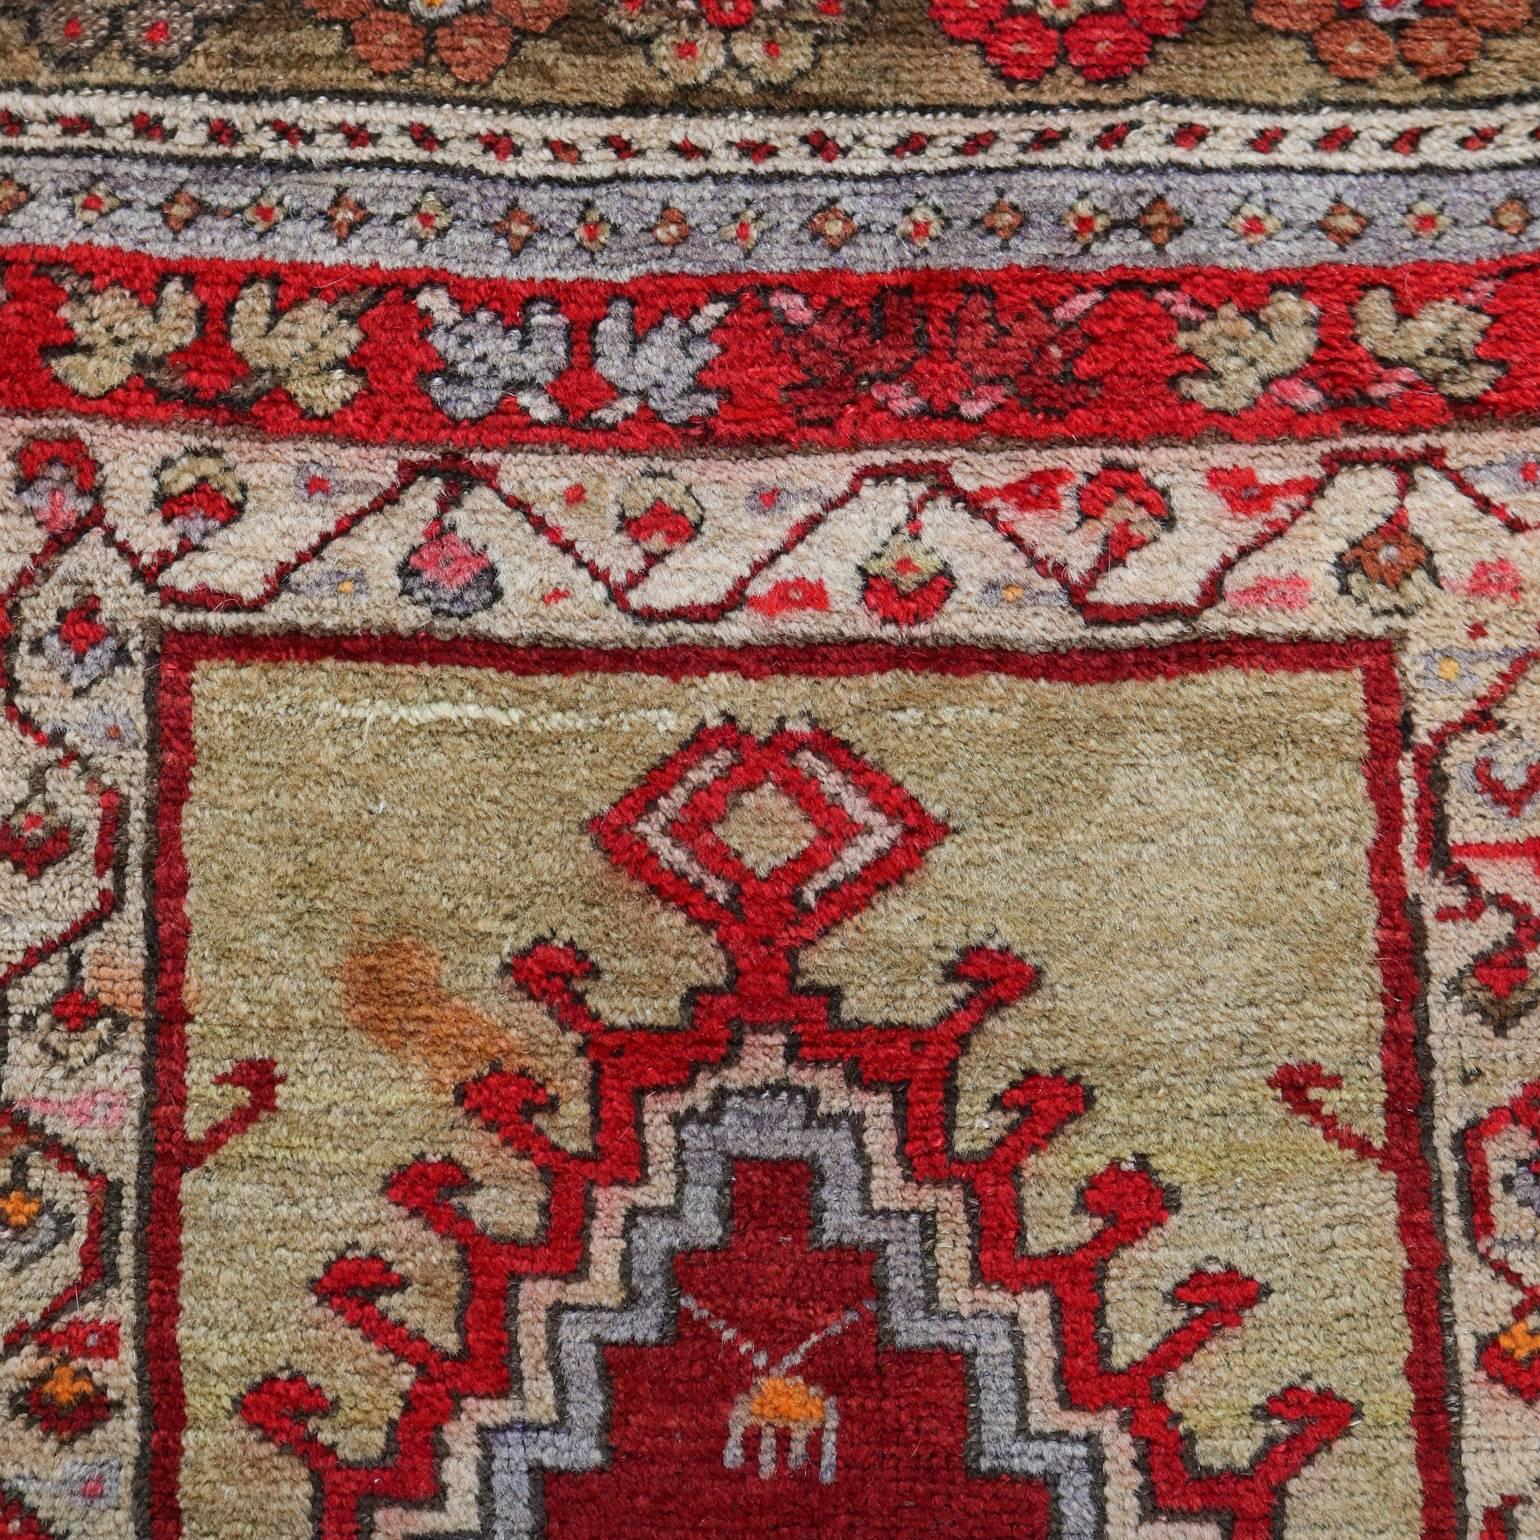 Antique hand-knotted Turkish prayer rug features hand woven vegetable dyed wool in geometric, floral and foliate design, circa 1900

Measures: 64"x 44".